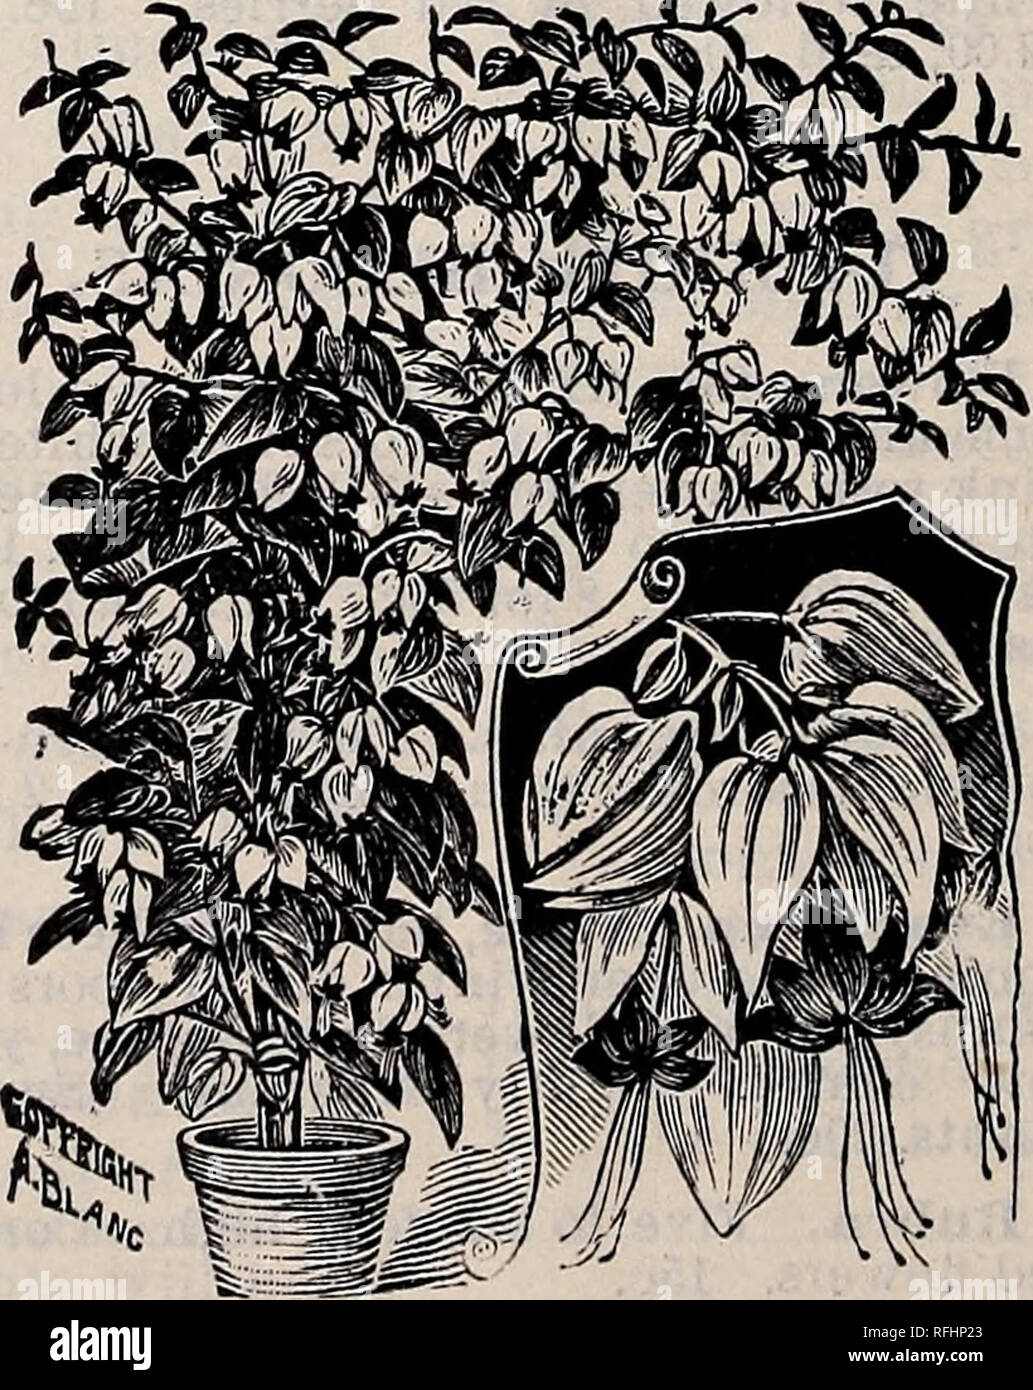 . 1900 catalogue of reliable garden and agricultural seeds. Nursery stock Pennsylvania Catalogs; Flowers Seeds Catalogs; Vegetables Seeds Catalogs; Fruit Seeds Catalogs. LOTUS—Coral Qem. Nothing prettier under the sun for a hanging basket. Delicate silvery green feathery foliage, drooping in a most graceful manner, and, when in flower, a grand sight, the brilliant, dazzling crimson buds resembling some quaint orchid. Pretty, whether in bloom or not. Price, 15c.. CRASSULA—Winter Beauty. Here is an excellent succulent plant for winter blooming—never misses to reward you with dense clusters of pi Stock Photo